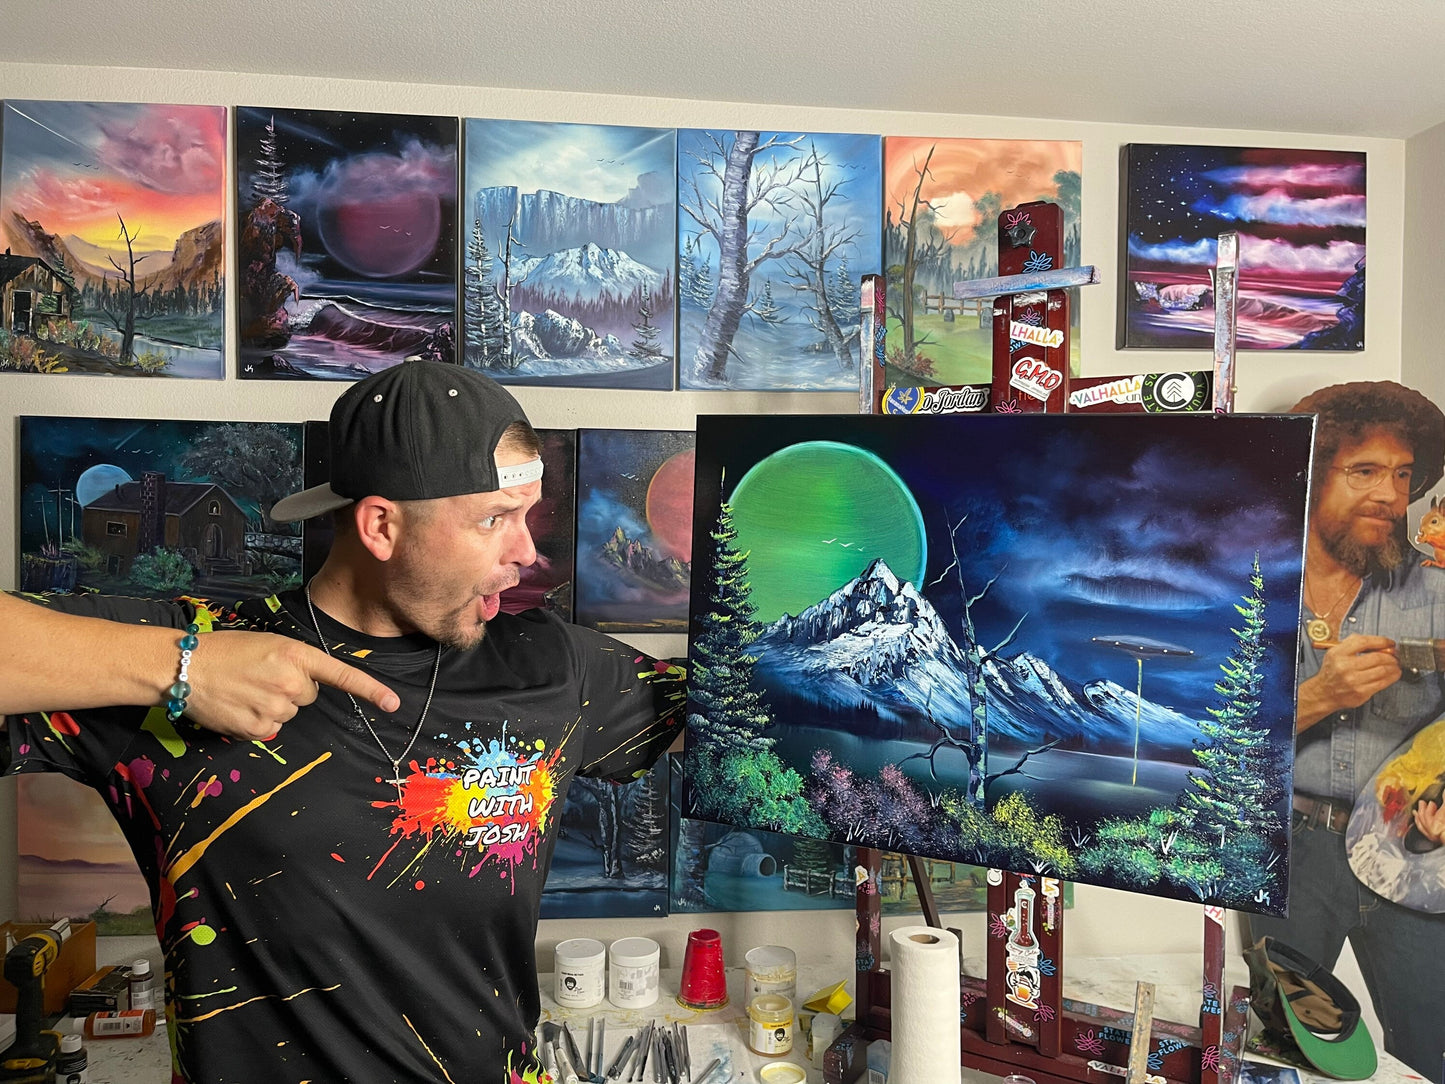 2 Custom Landscape Oil Paintings Painted Live on Tiktok and YouTube - date To Be Determined